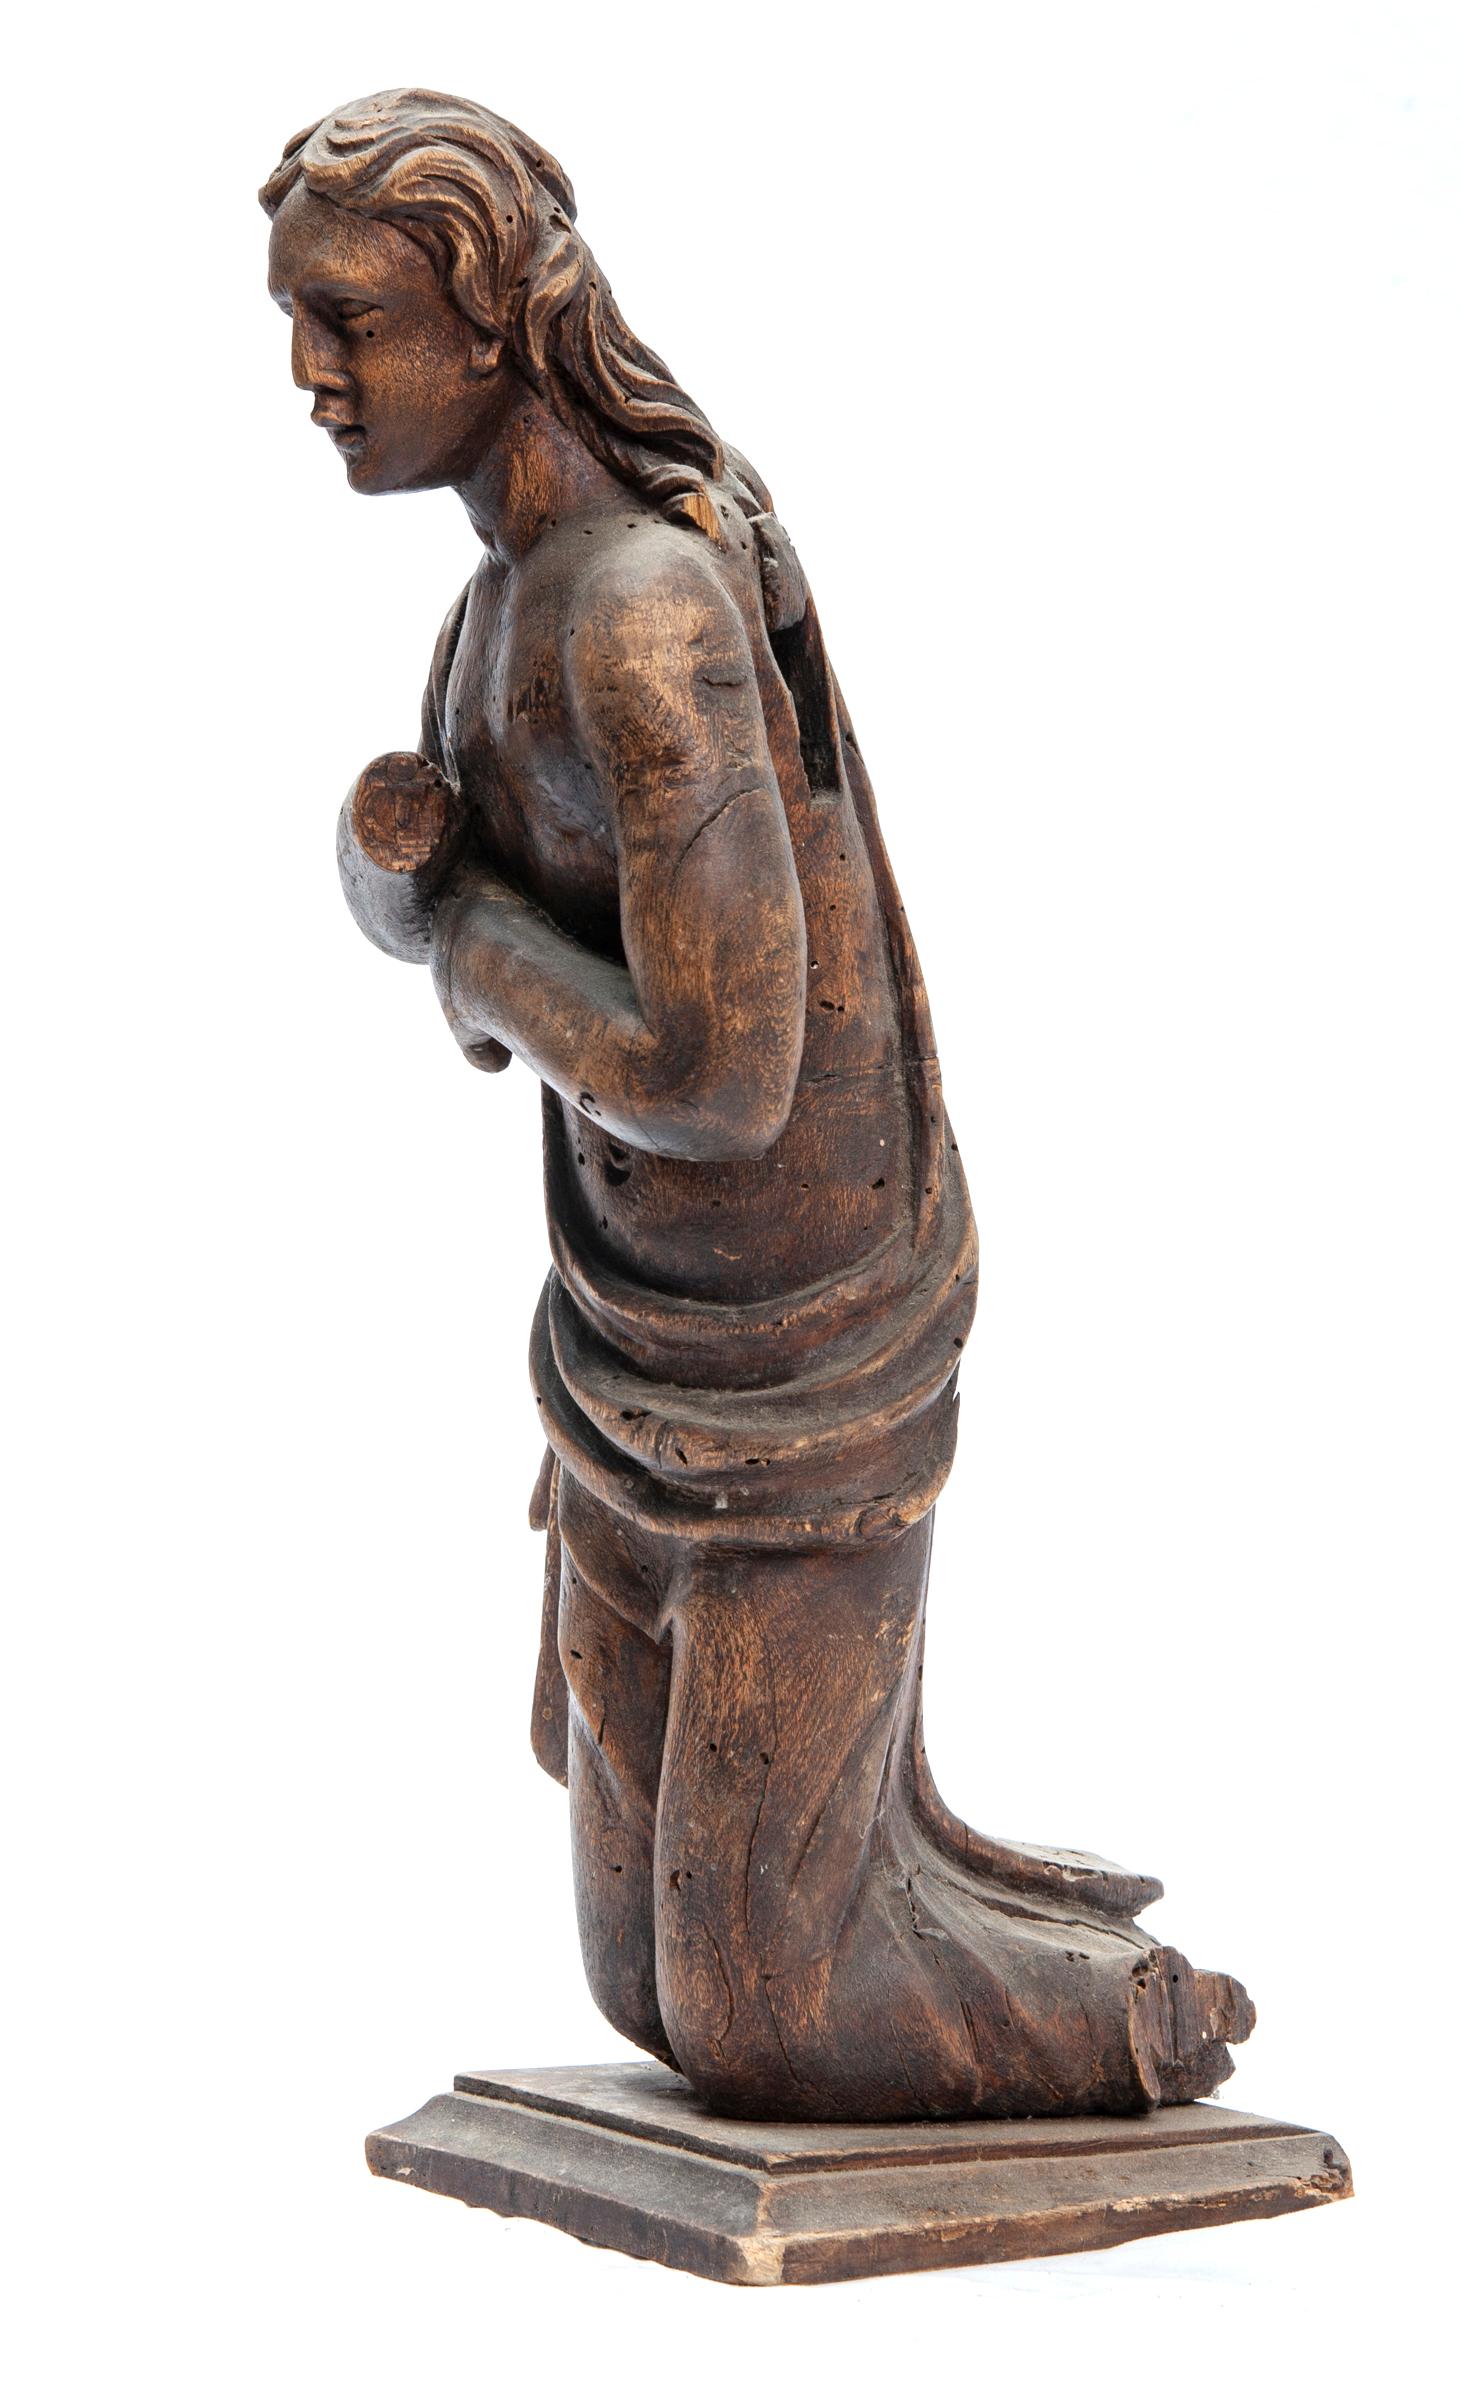 18th century wooden carving of an female form.
Presumed to be a French church piece.
This figure has a beautiful face. 